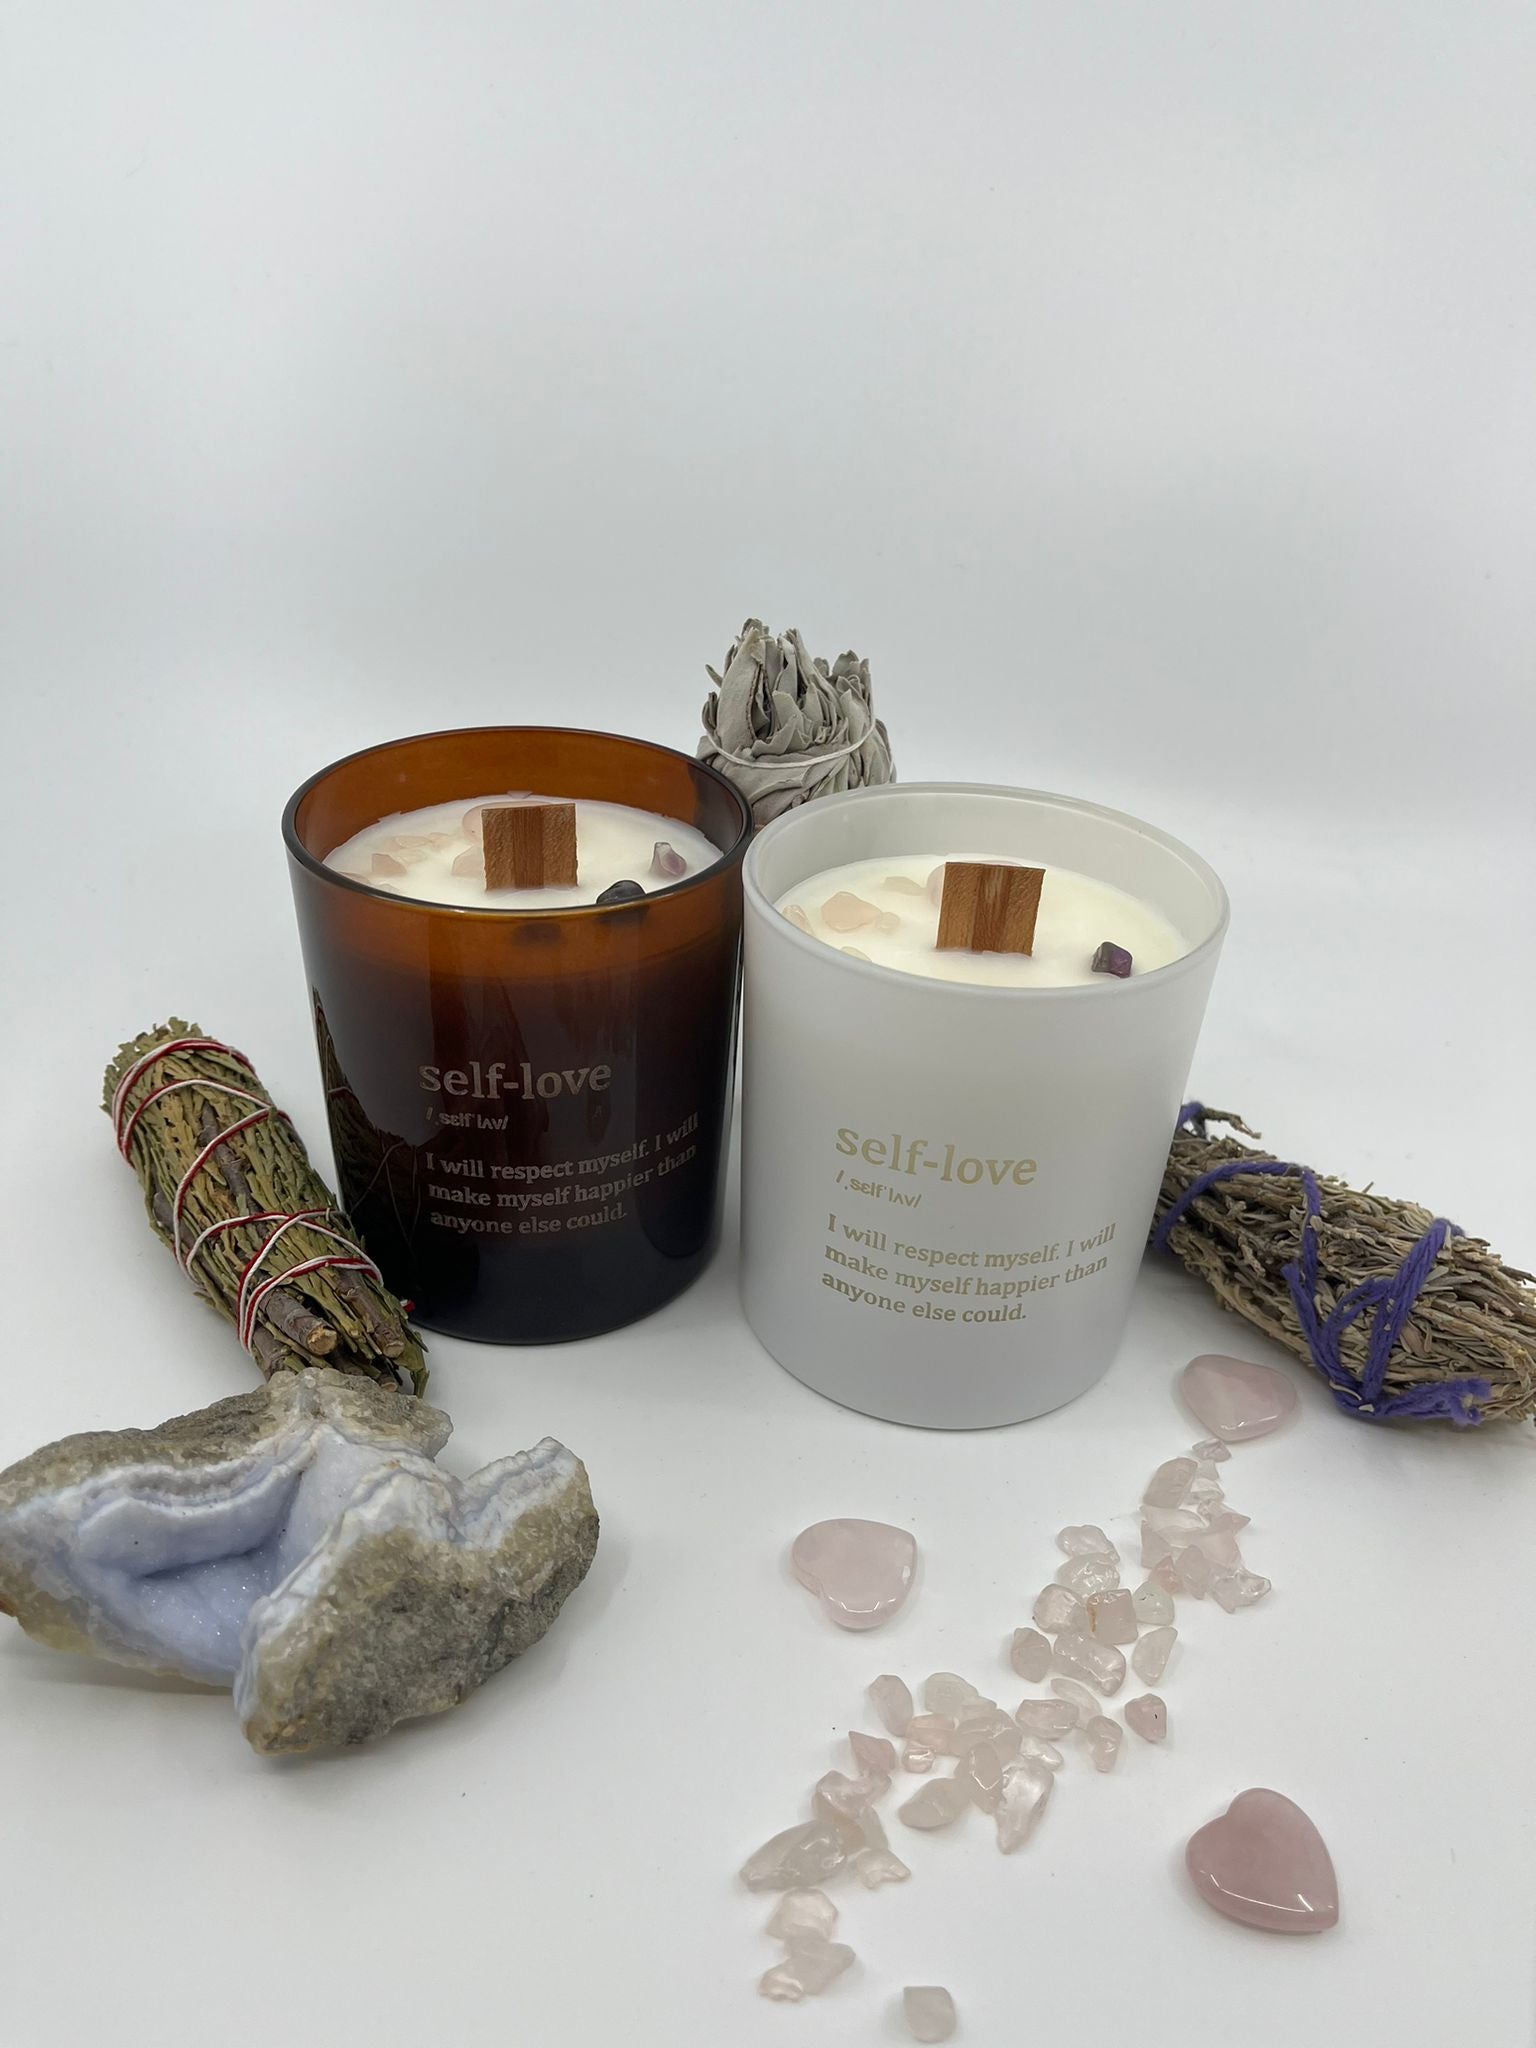 ***LIMITED EDITION*** Crystal Affirmation Candle: Uplifting Blueberry & Vanilla Scent, Handmade with Organic Rapeseed & Coconut Wax Blend - Everyday Rocks